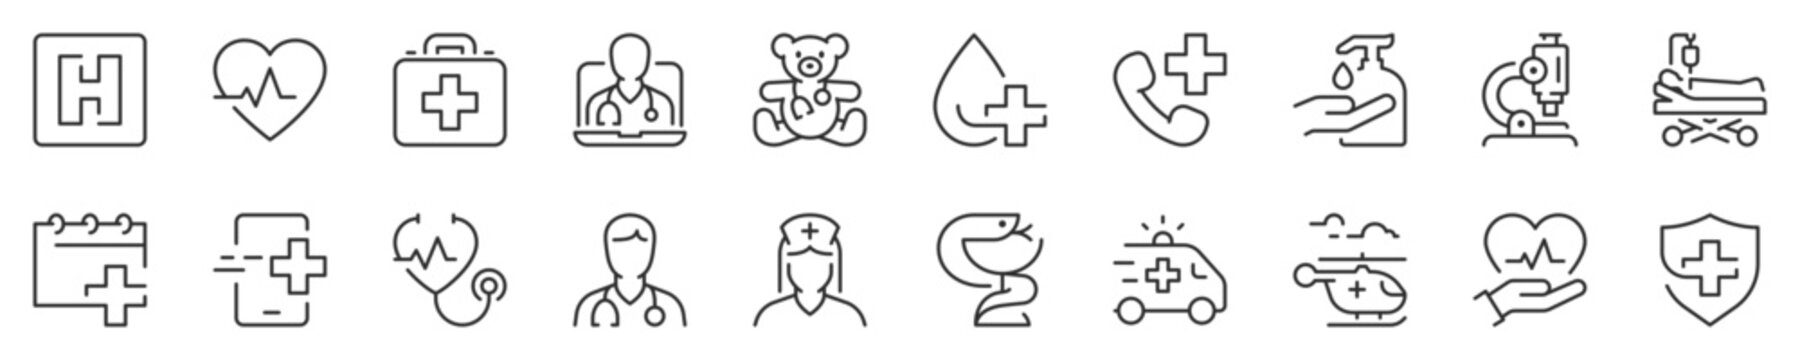 Hospital and medical care thin line icon set 1 of 3. Symbol collection in transparent background. Editable vector stroke. 512x512 Pixel Perfect.